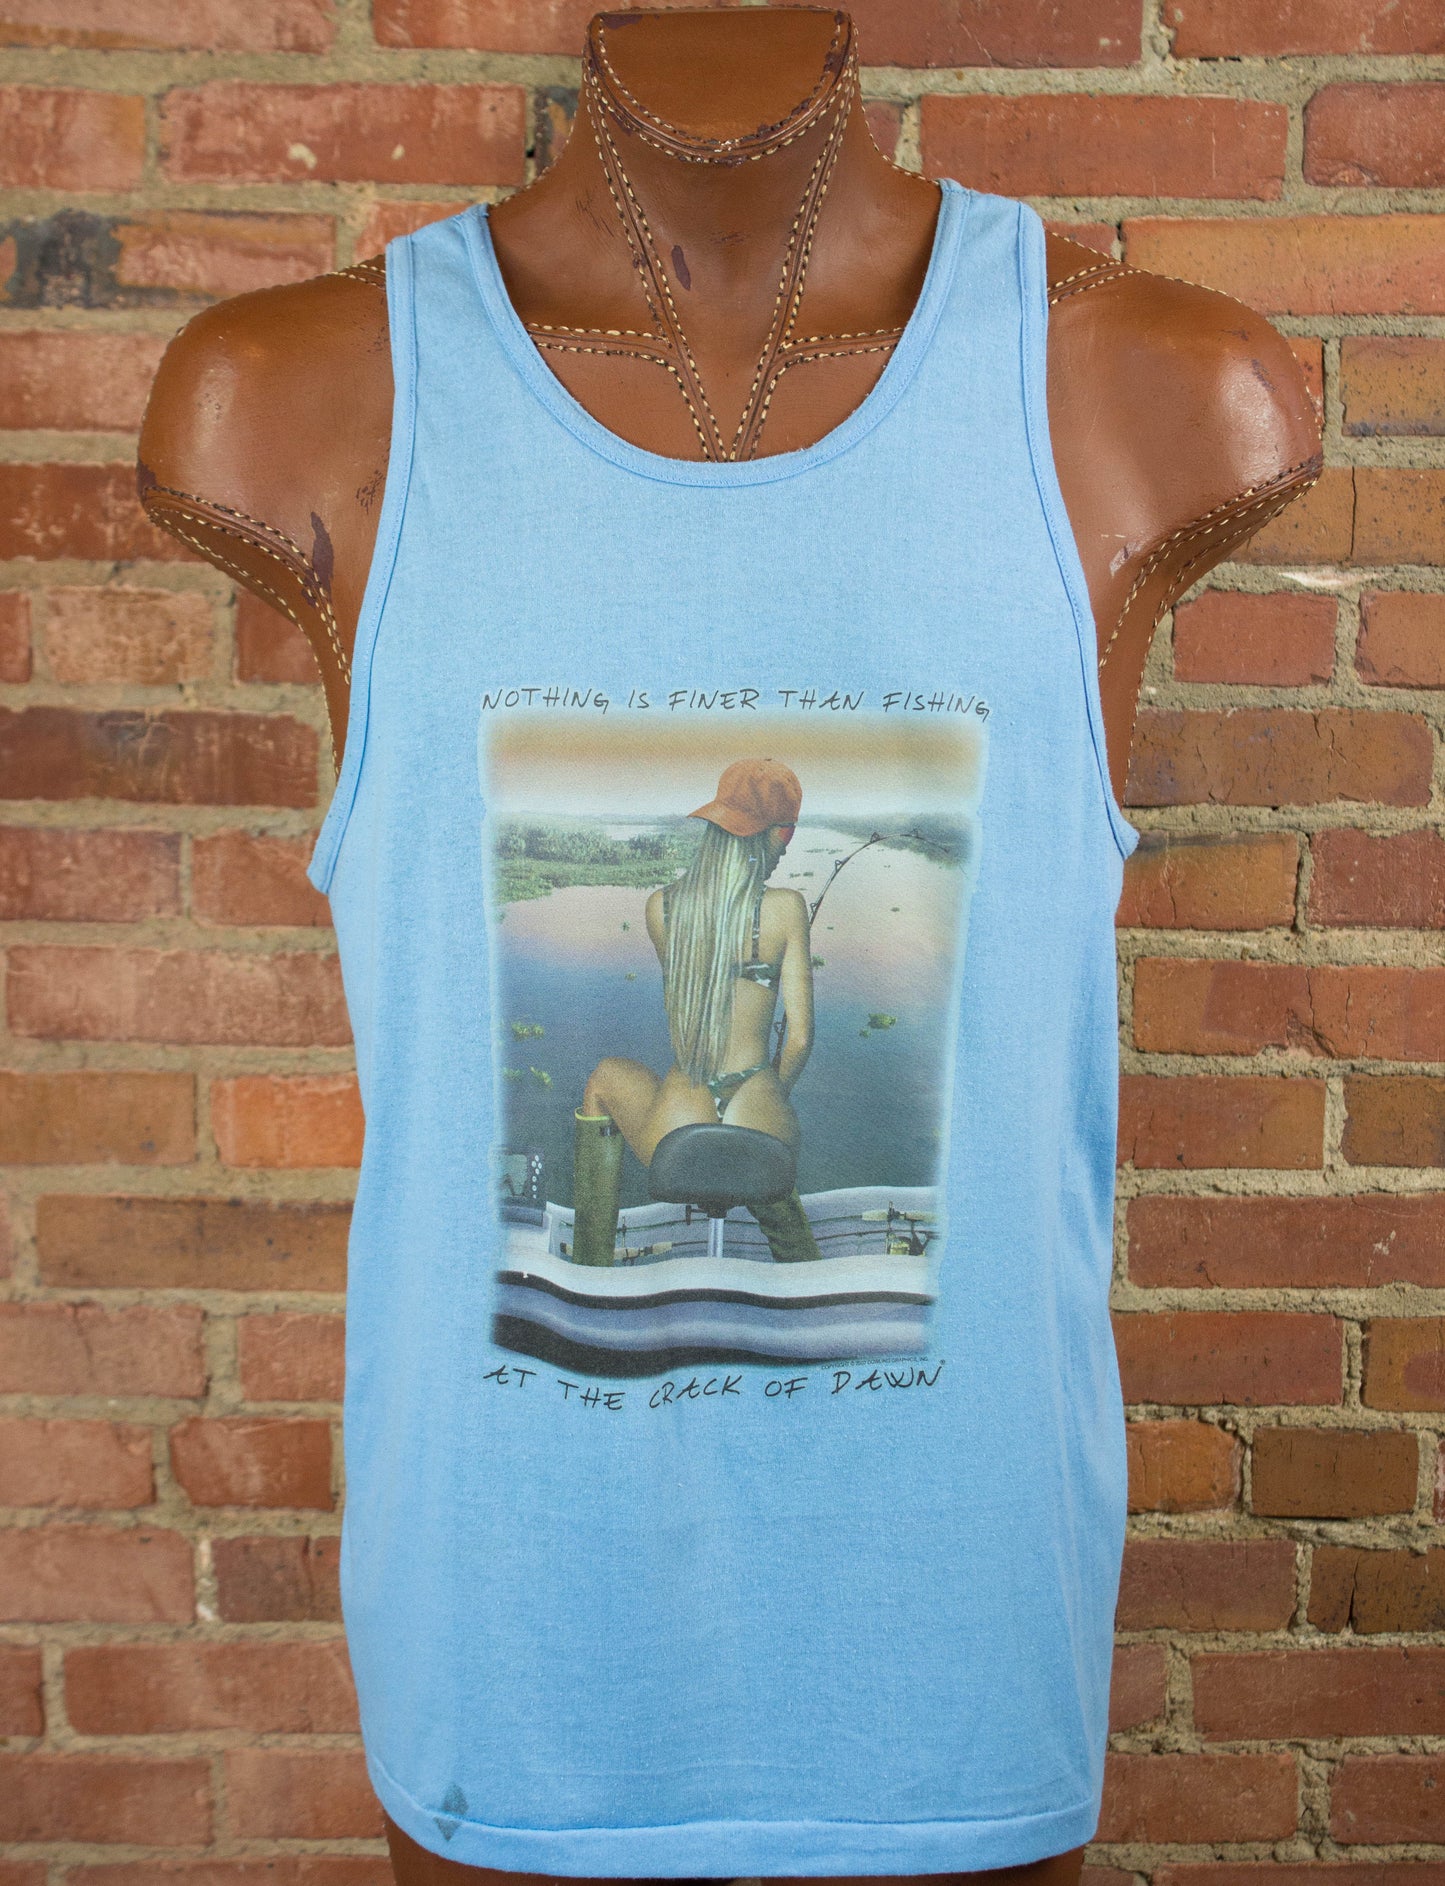 Vintage 80s Nothing Is Finer Than Fishing at the Crack of Dawn Blue Iron On Graphic Tank Top Unisex XL